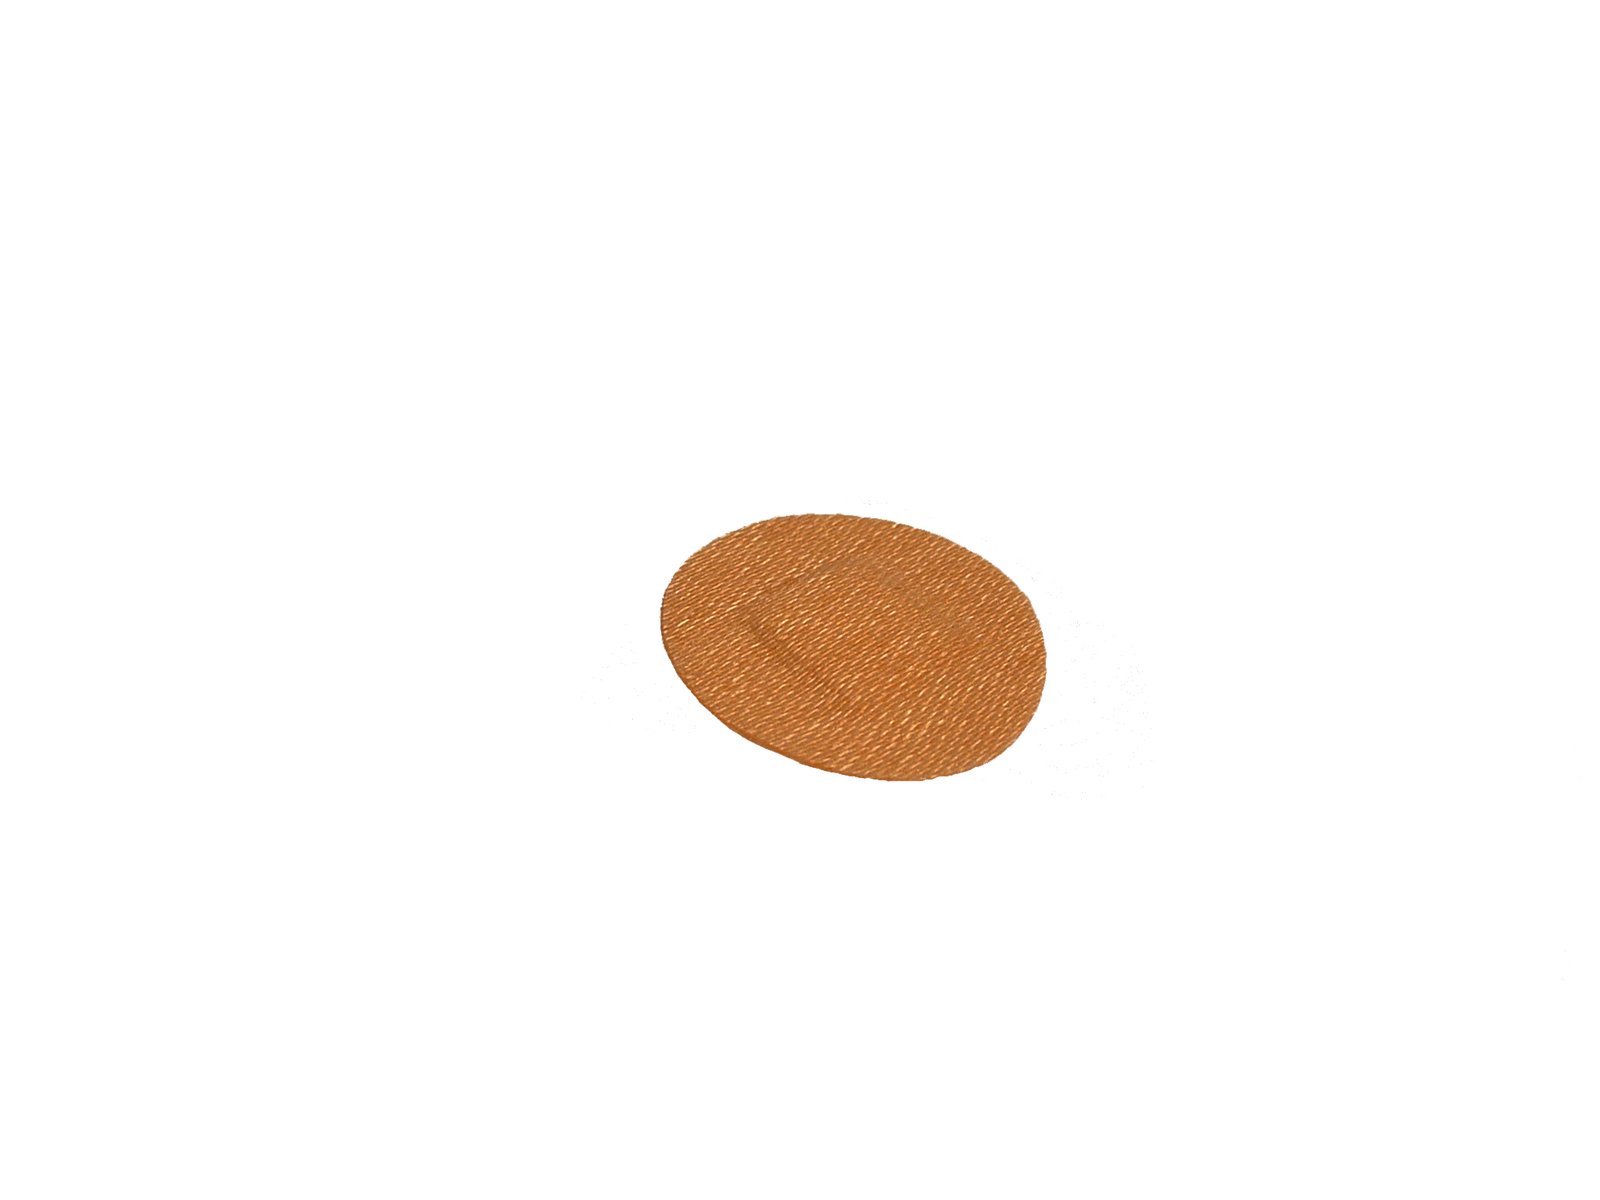 a piece of wood is sitting against a white background